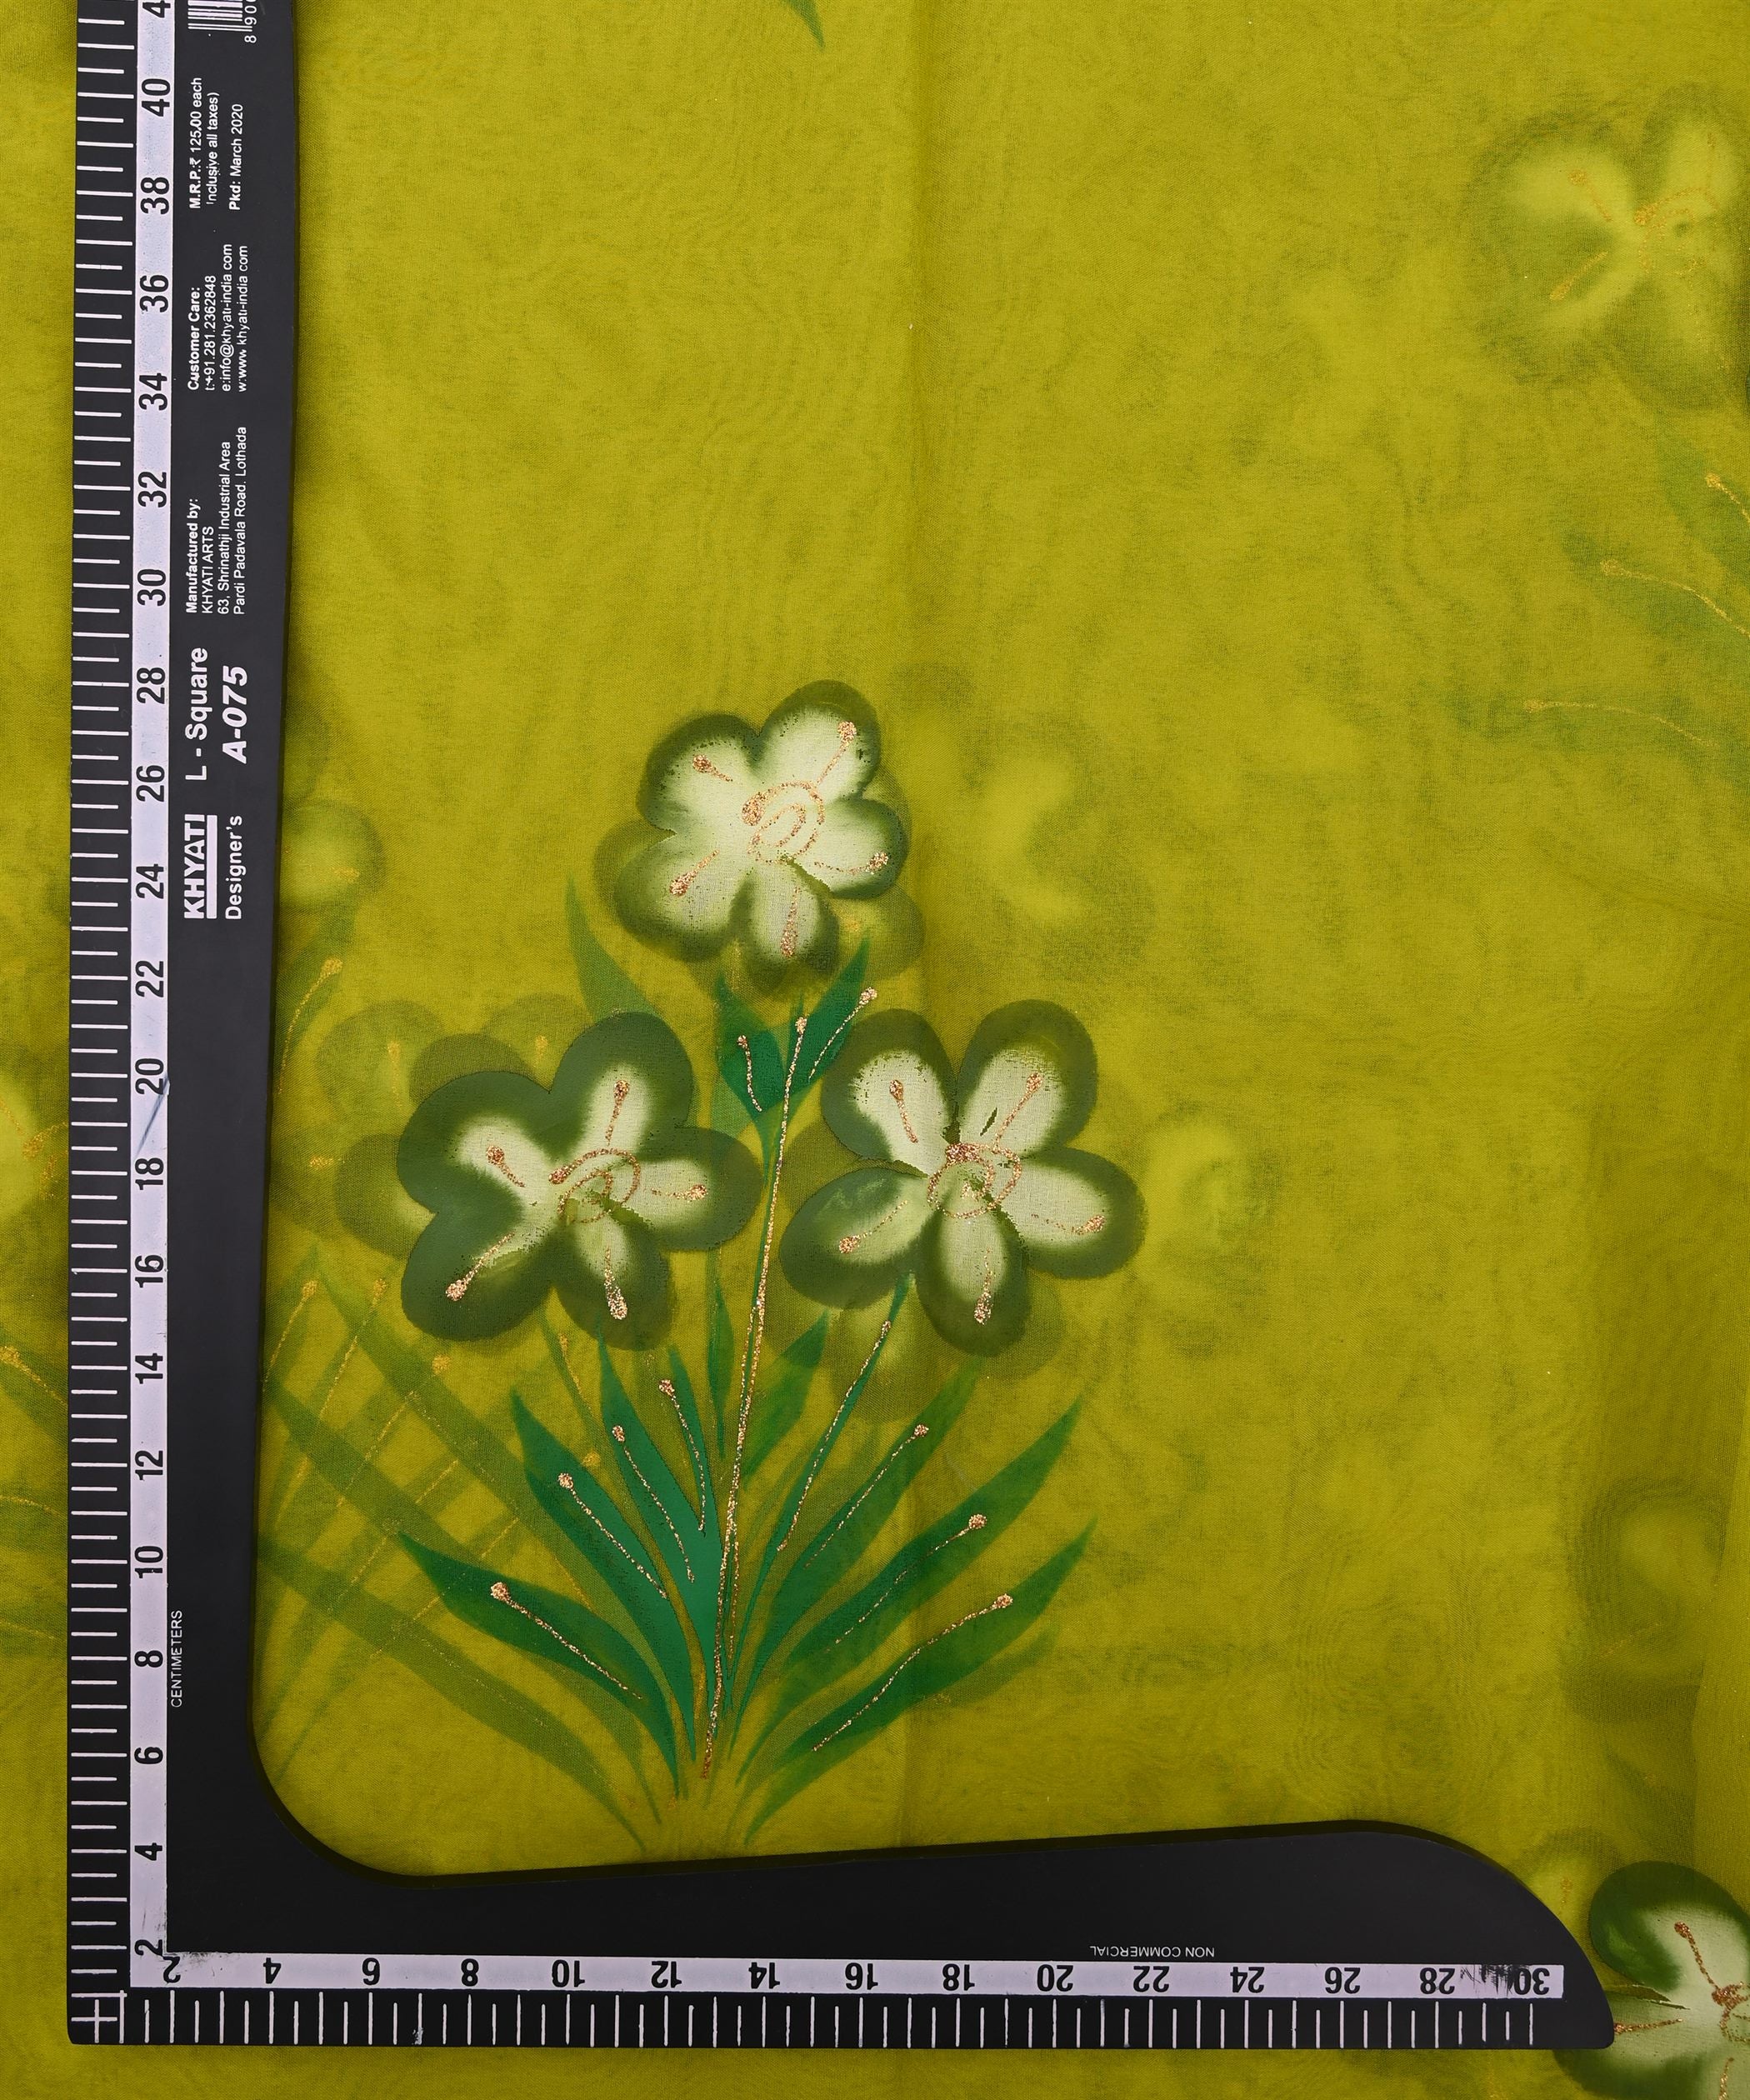 Olive Green Floral design Hand printed Organza fabric